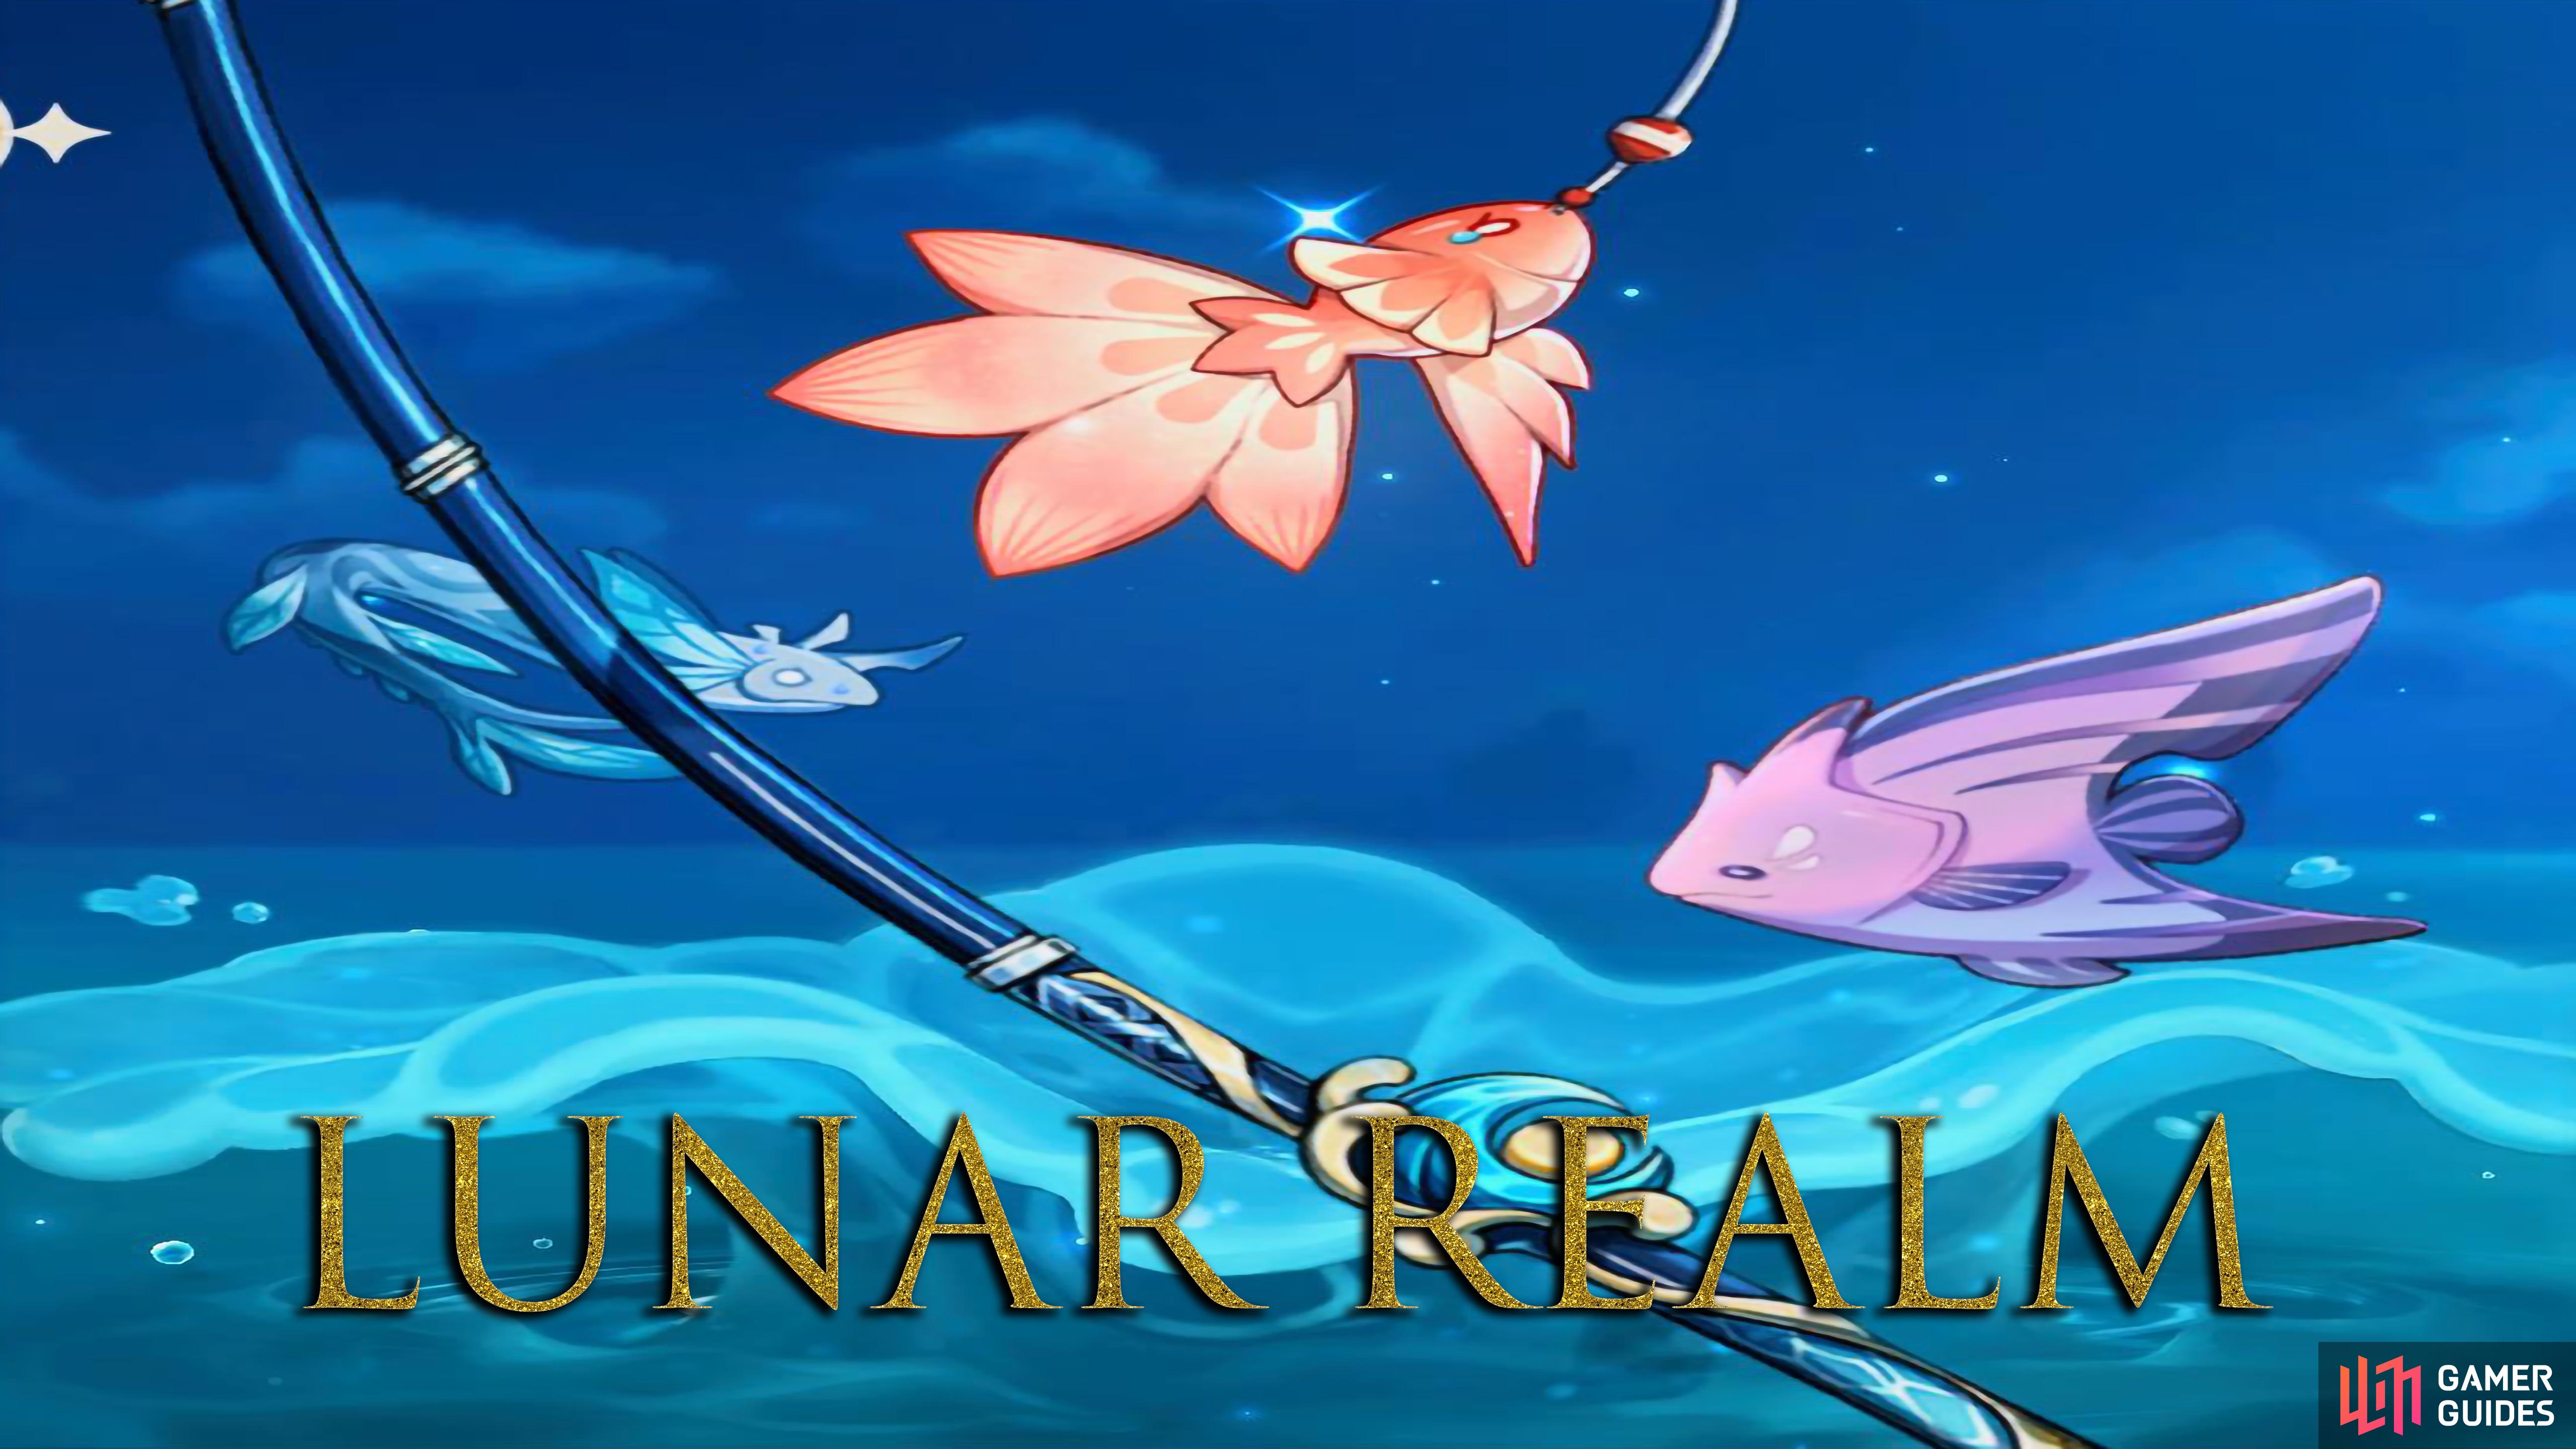 The Lunar Realm is a Fishing Event which rewards the exclusive “Moonstringer” fishing rod.